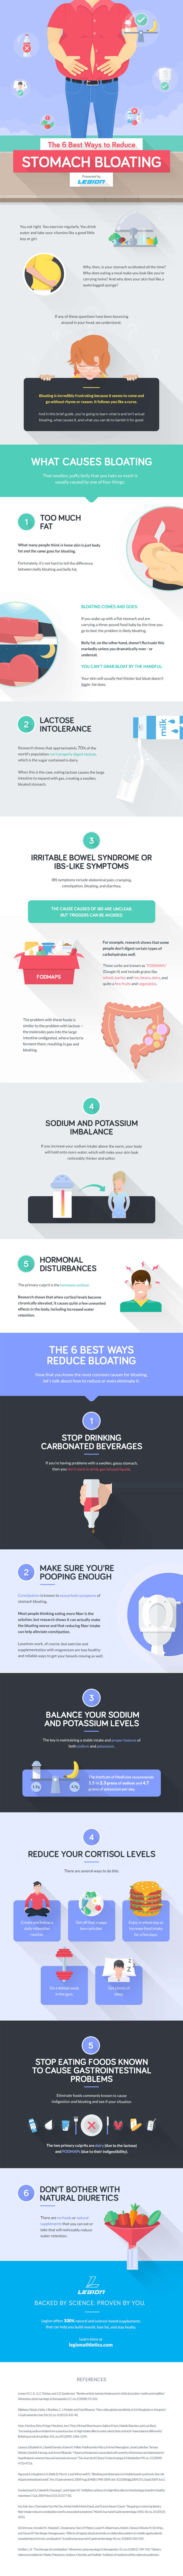 [INFOGRAPHIC] The 6 Best Ways to Get Rid of Stomach Bloating